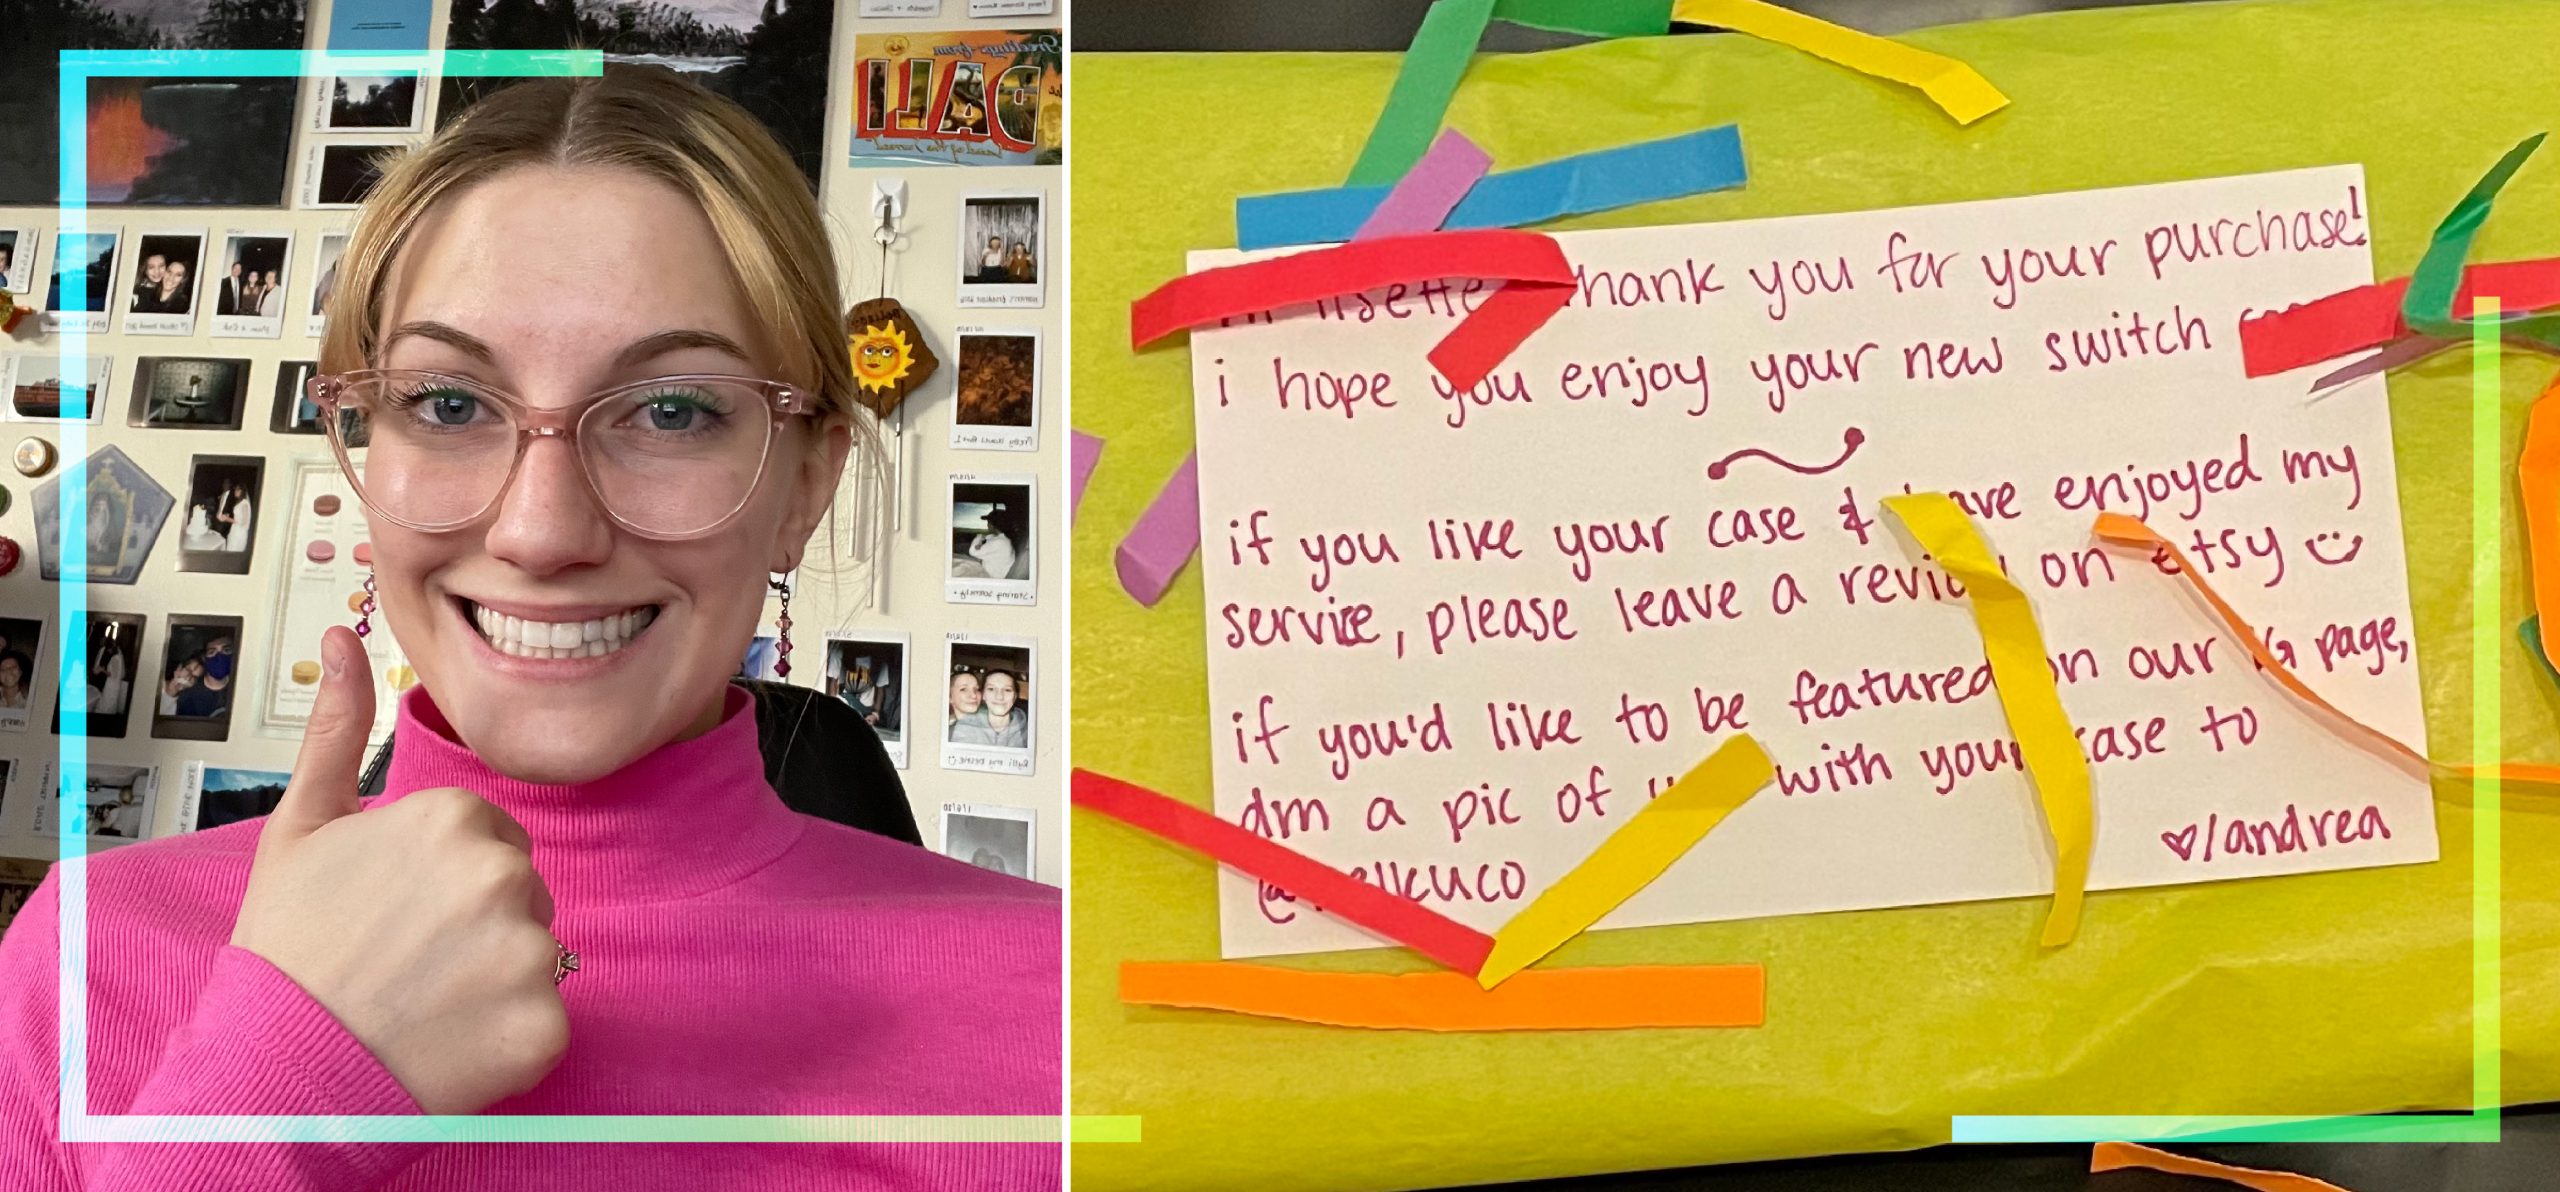 Andrea Hunter, left, and a hand-written note to one of her crochet Etsy shop customers.